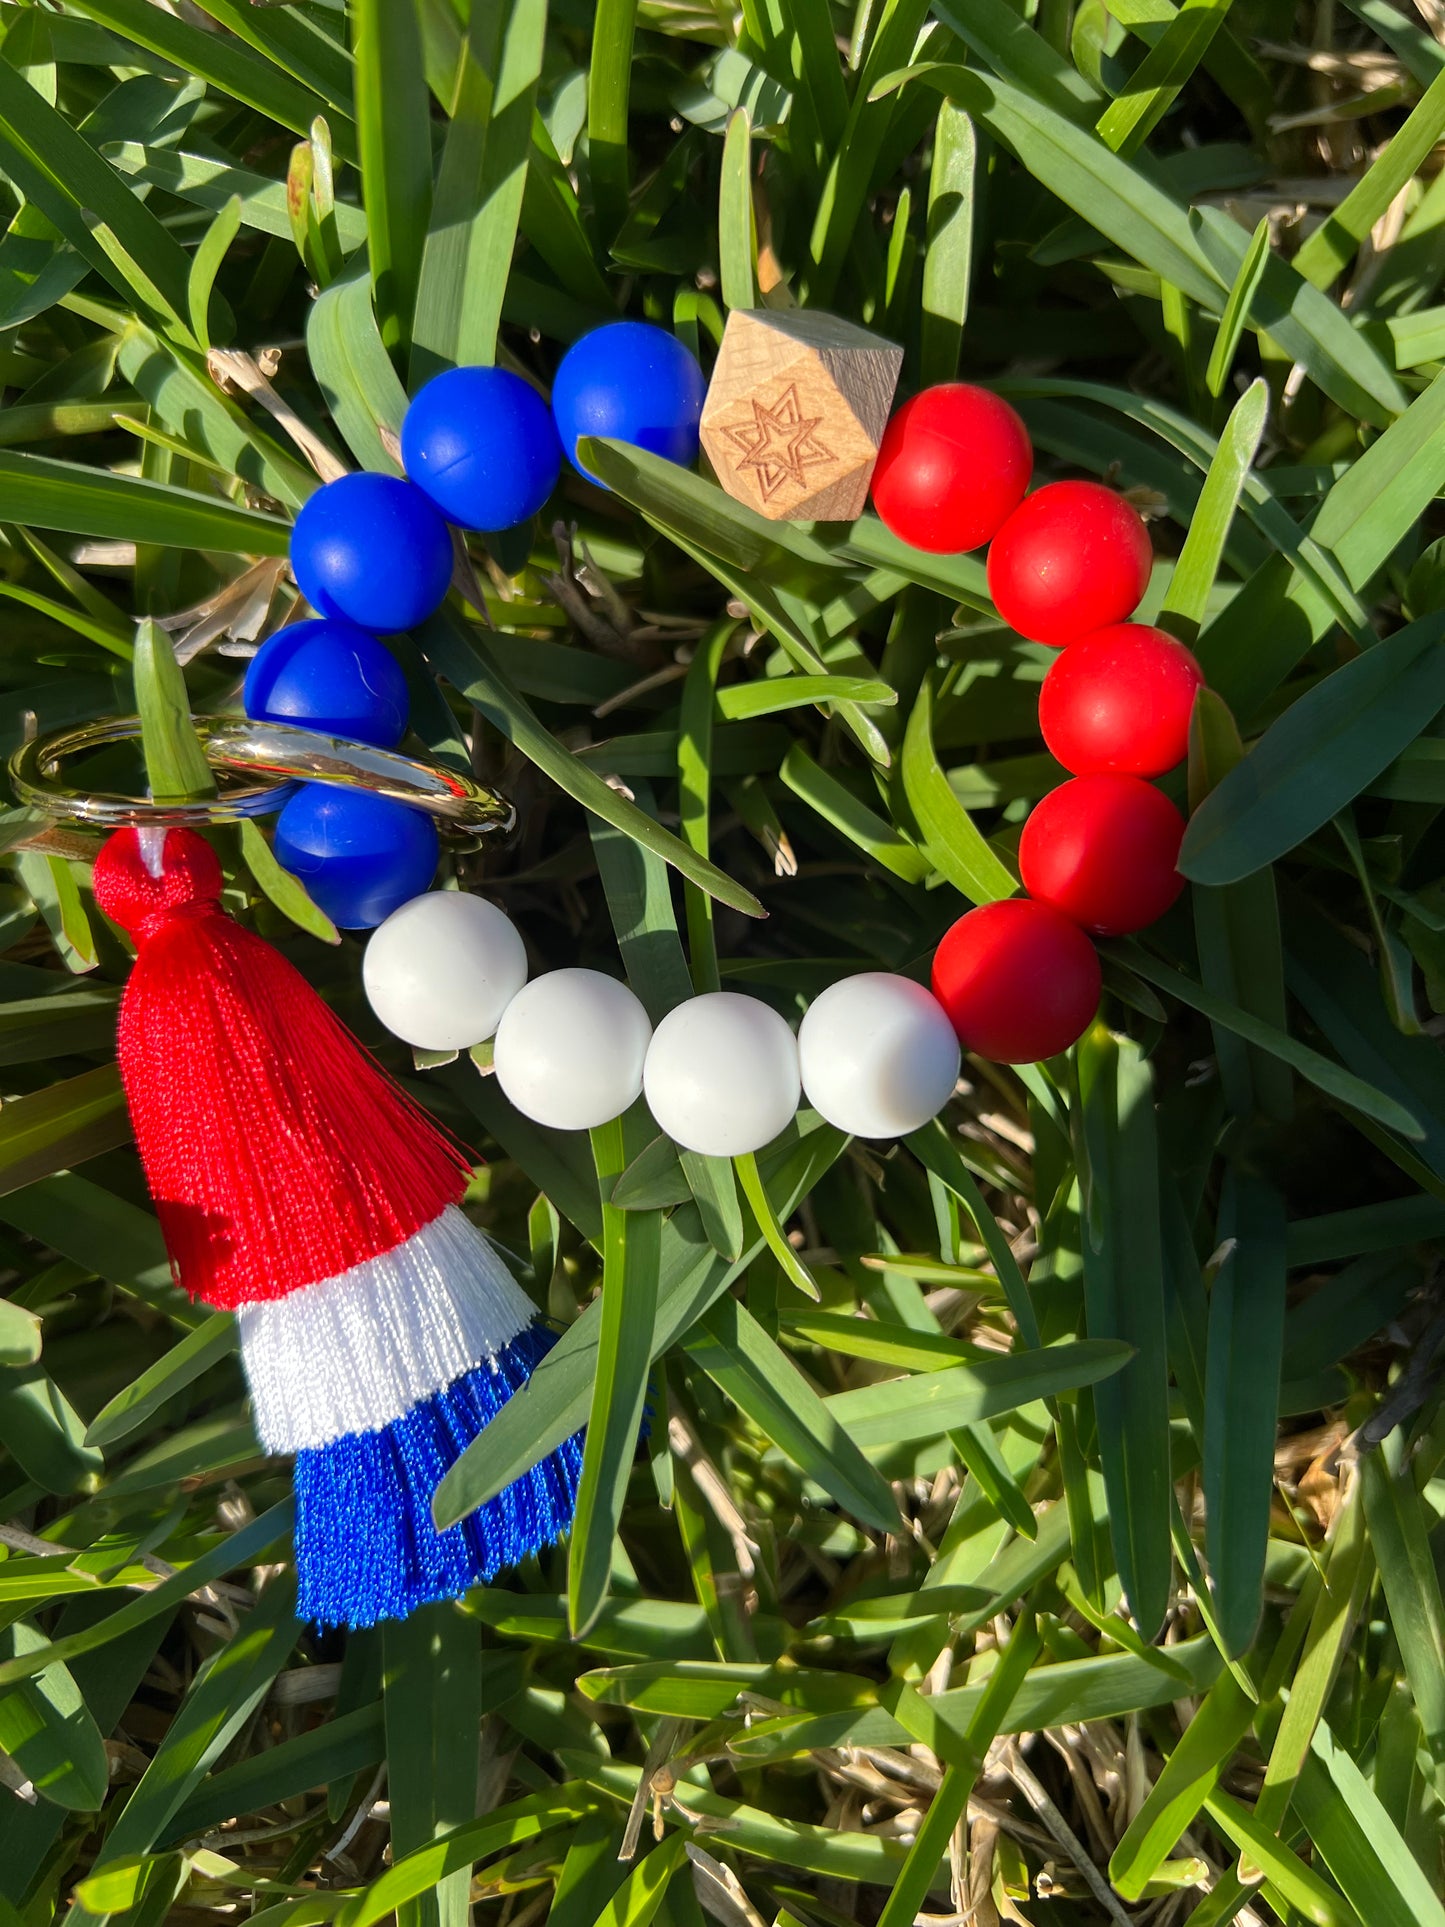 Colorful Beads Tassle Bracelet  Red, White and Blue